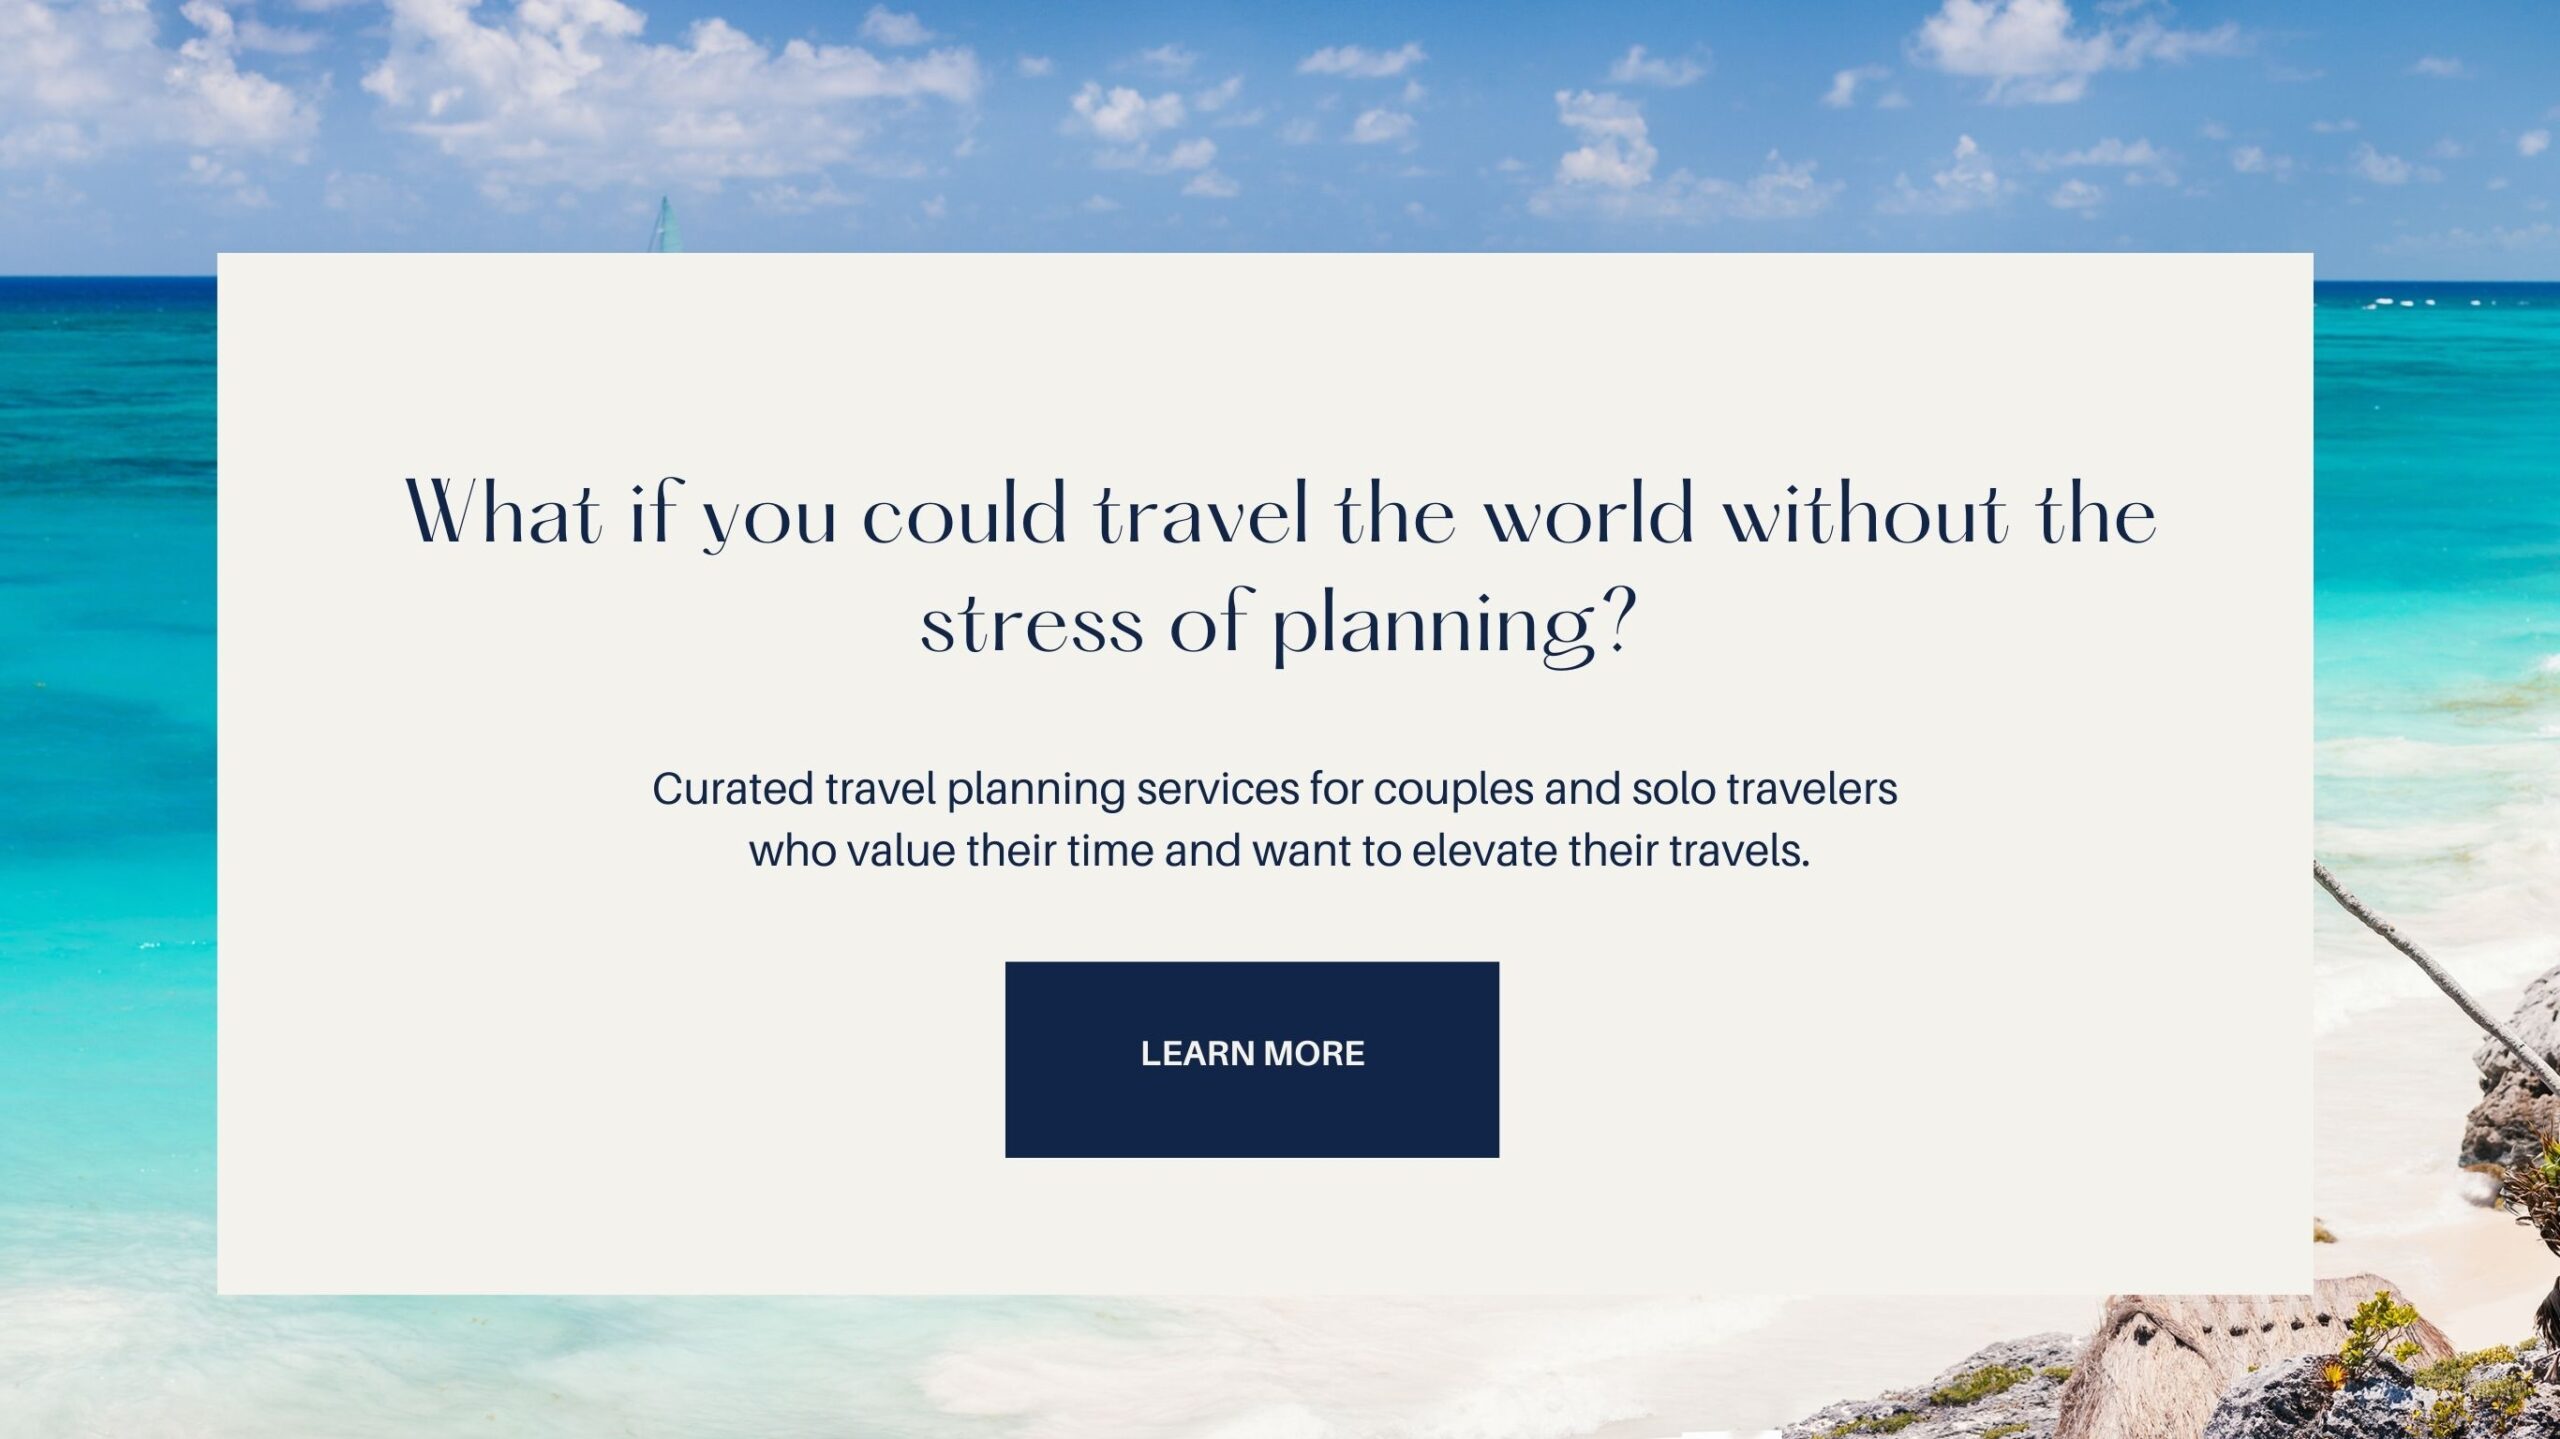 AWhat if you could travel the world without the stress of planning